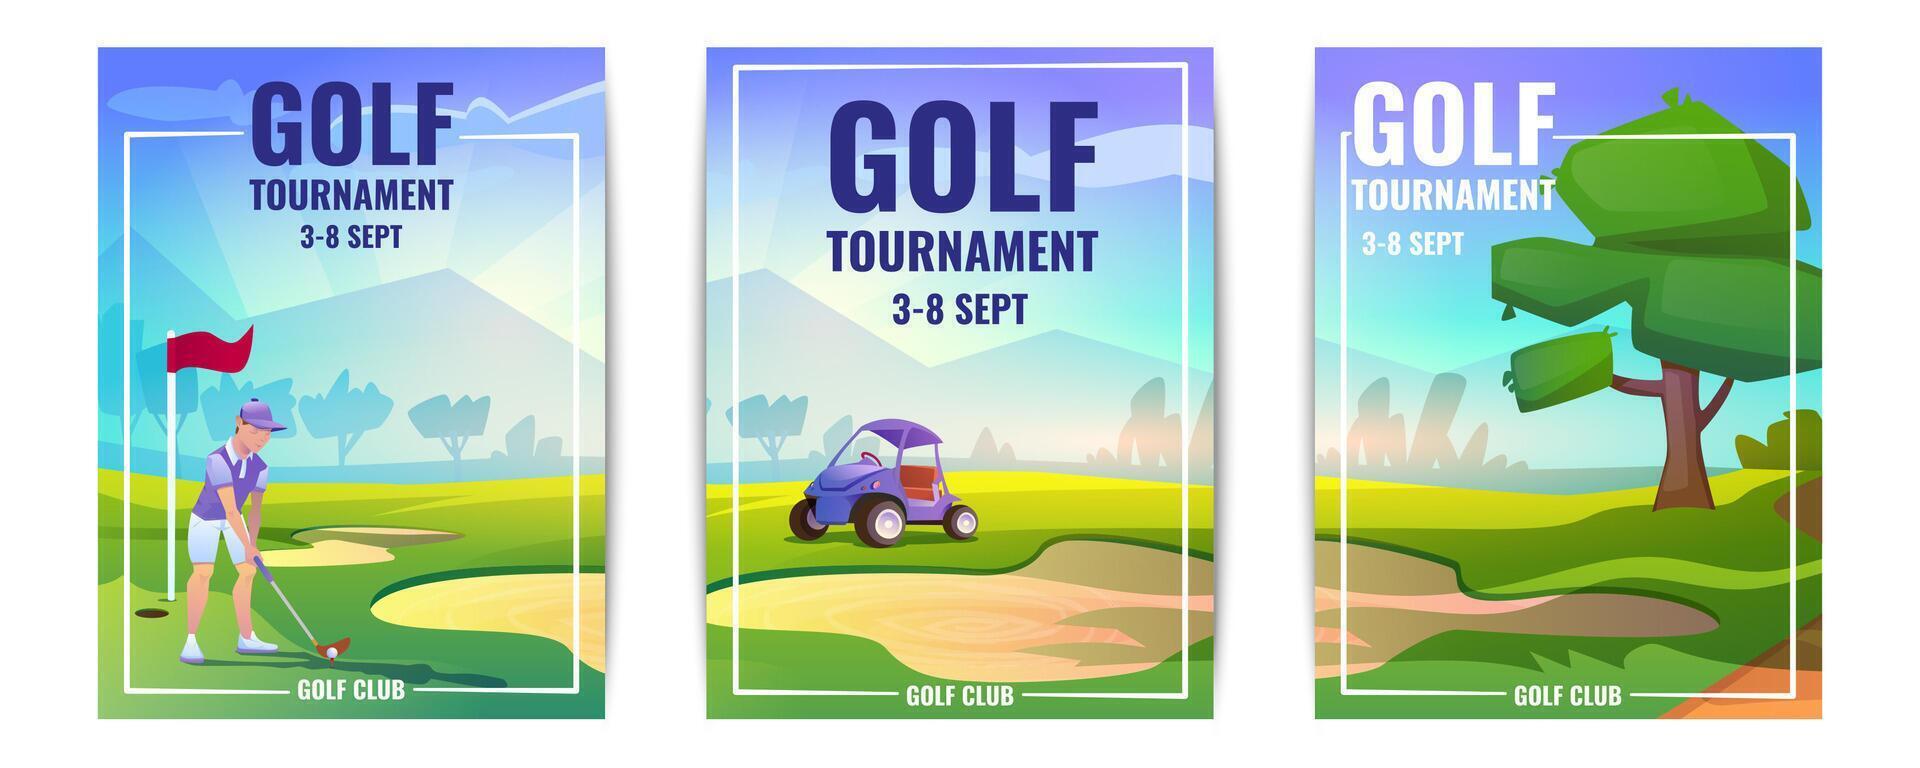 cartoon flyers or golf tournament posters with player man. Golfer person with putter and white ball, car, grass, tee and flag. Advertising sport competition vertical banners with sand bunker. vector